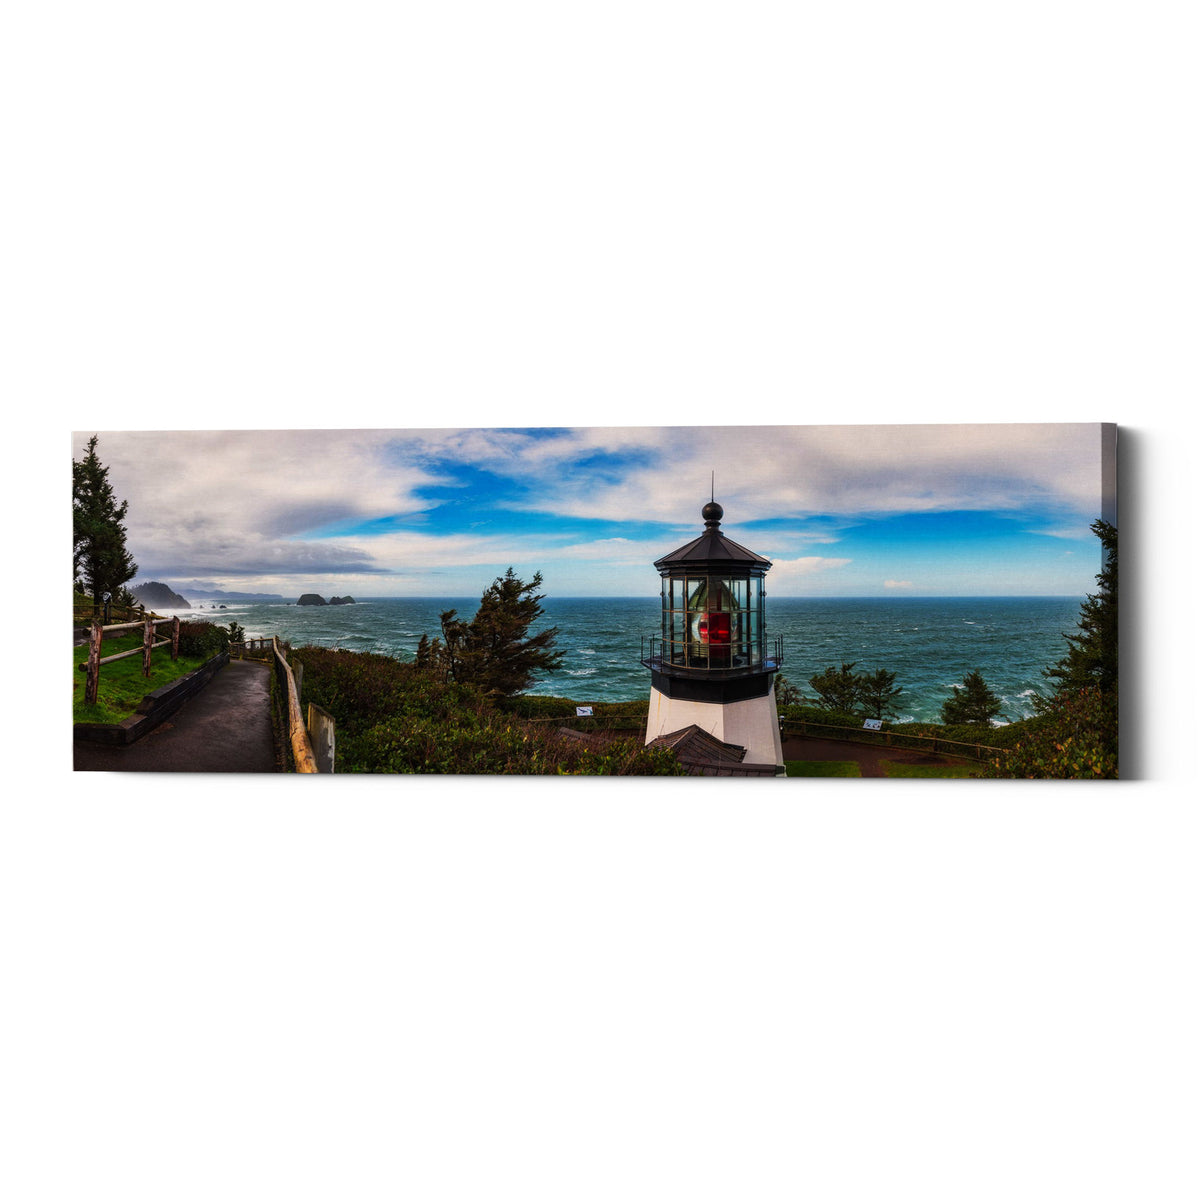 Epic Graffiti &quot;Cape Meares Bright&quot; by Darren White, Giclee Canvas Wall Art